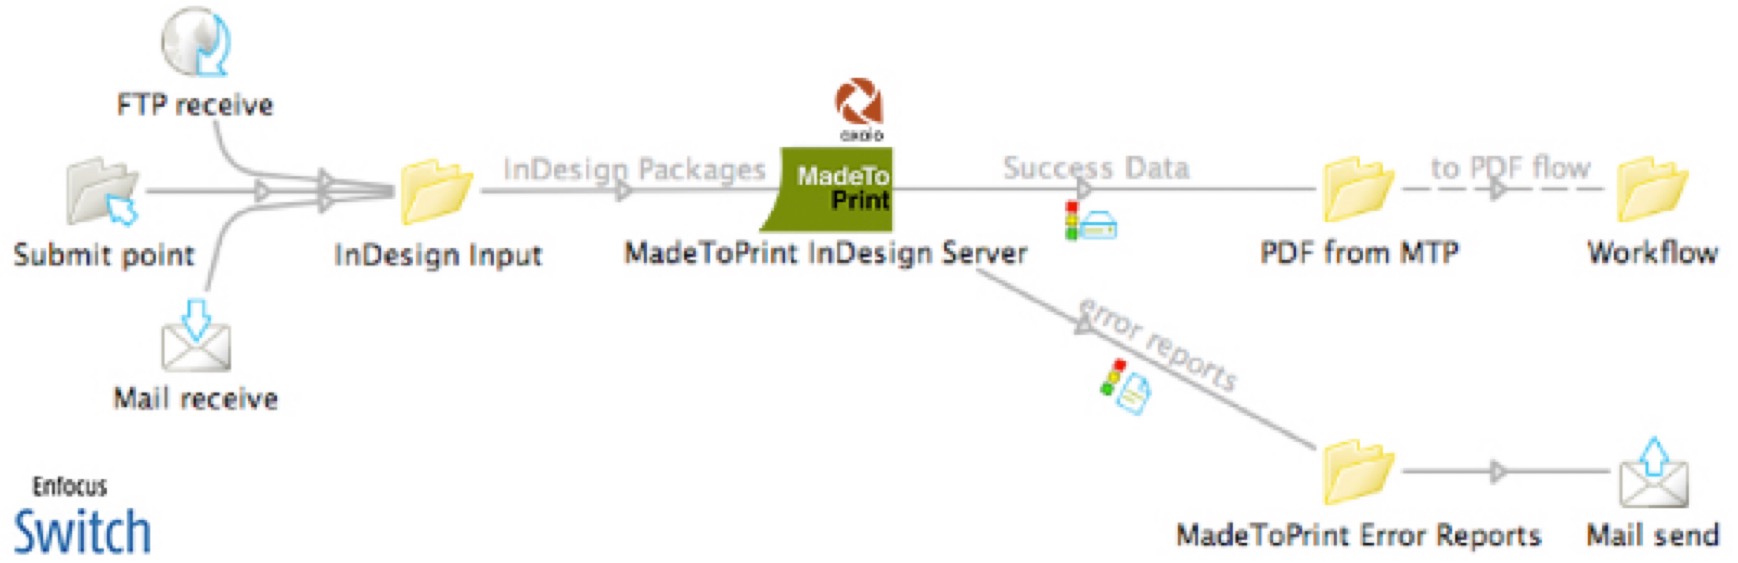 axaio MadeToPrint InDesign Server in a Switch Workflow - Advanced - Logo